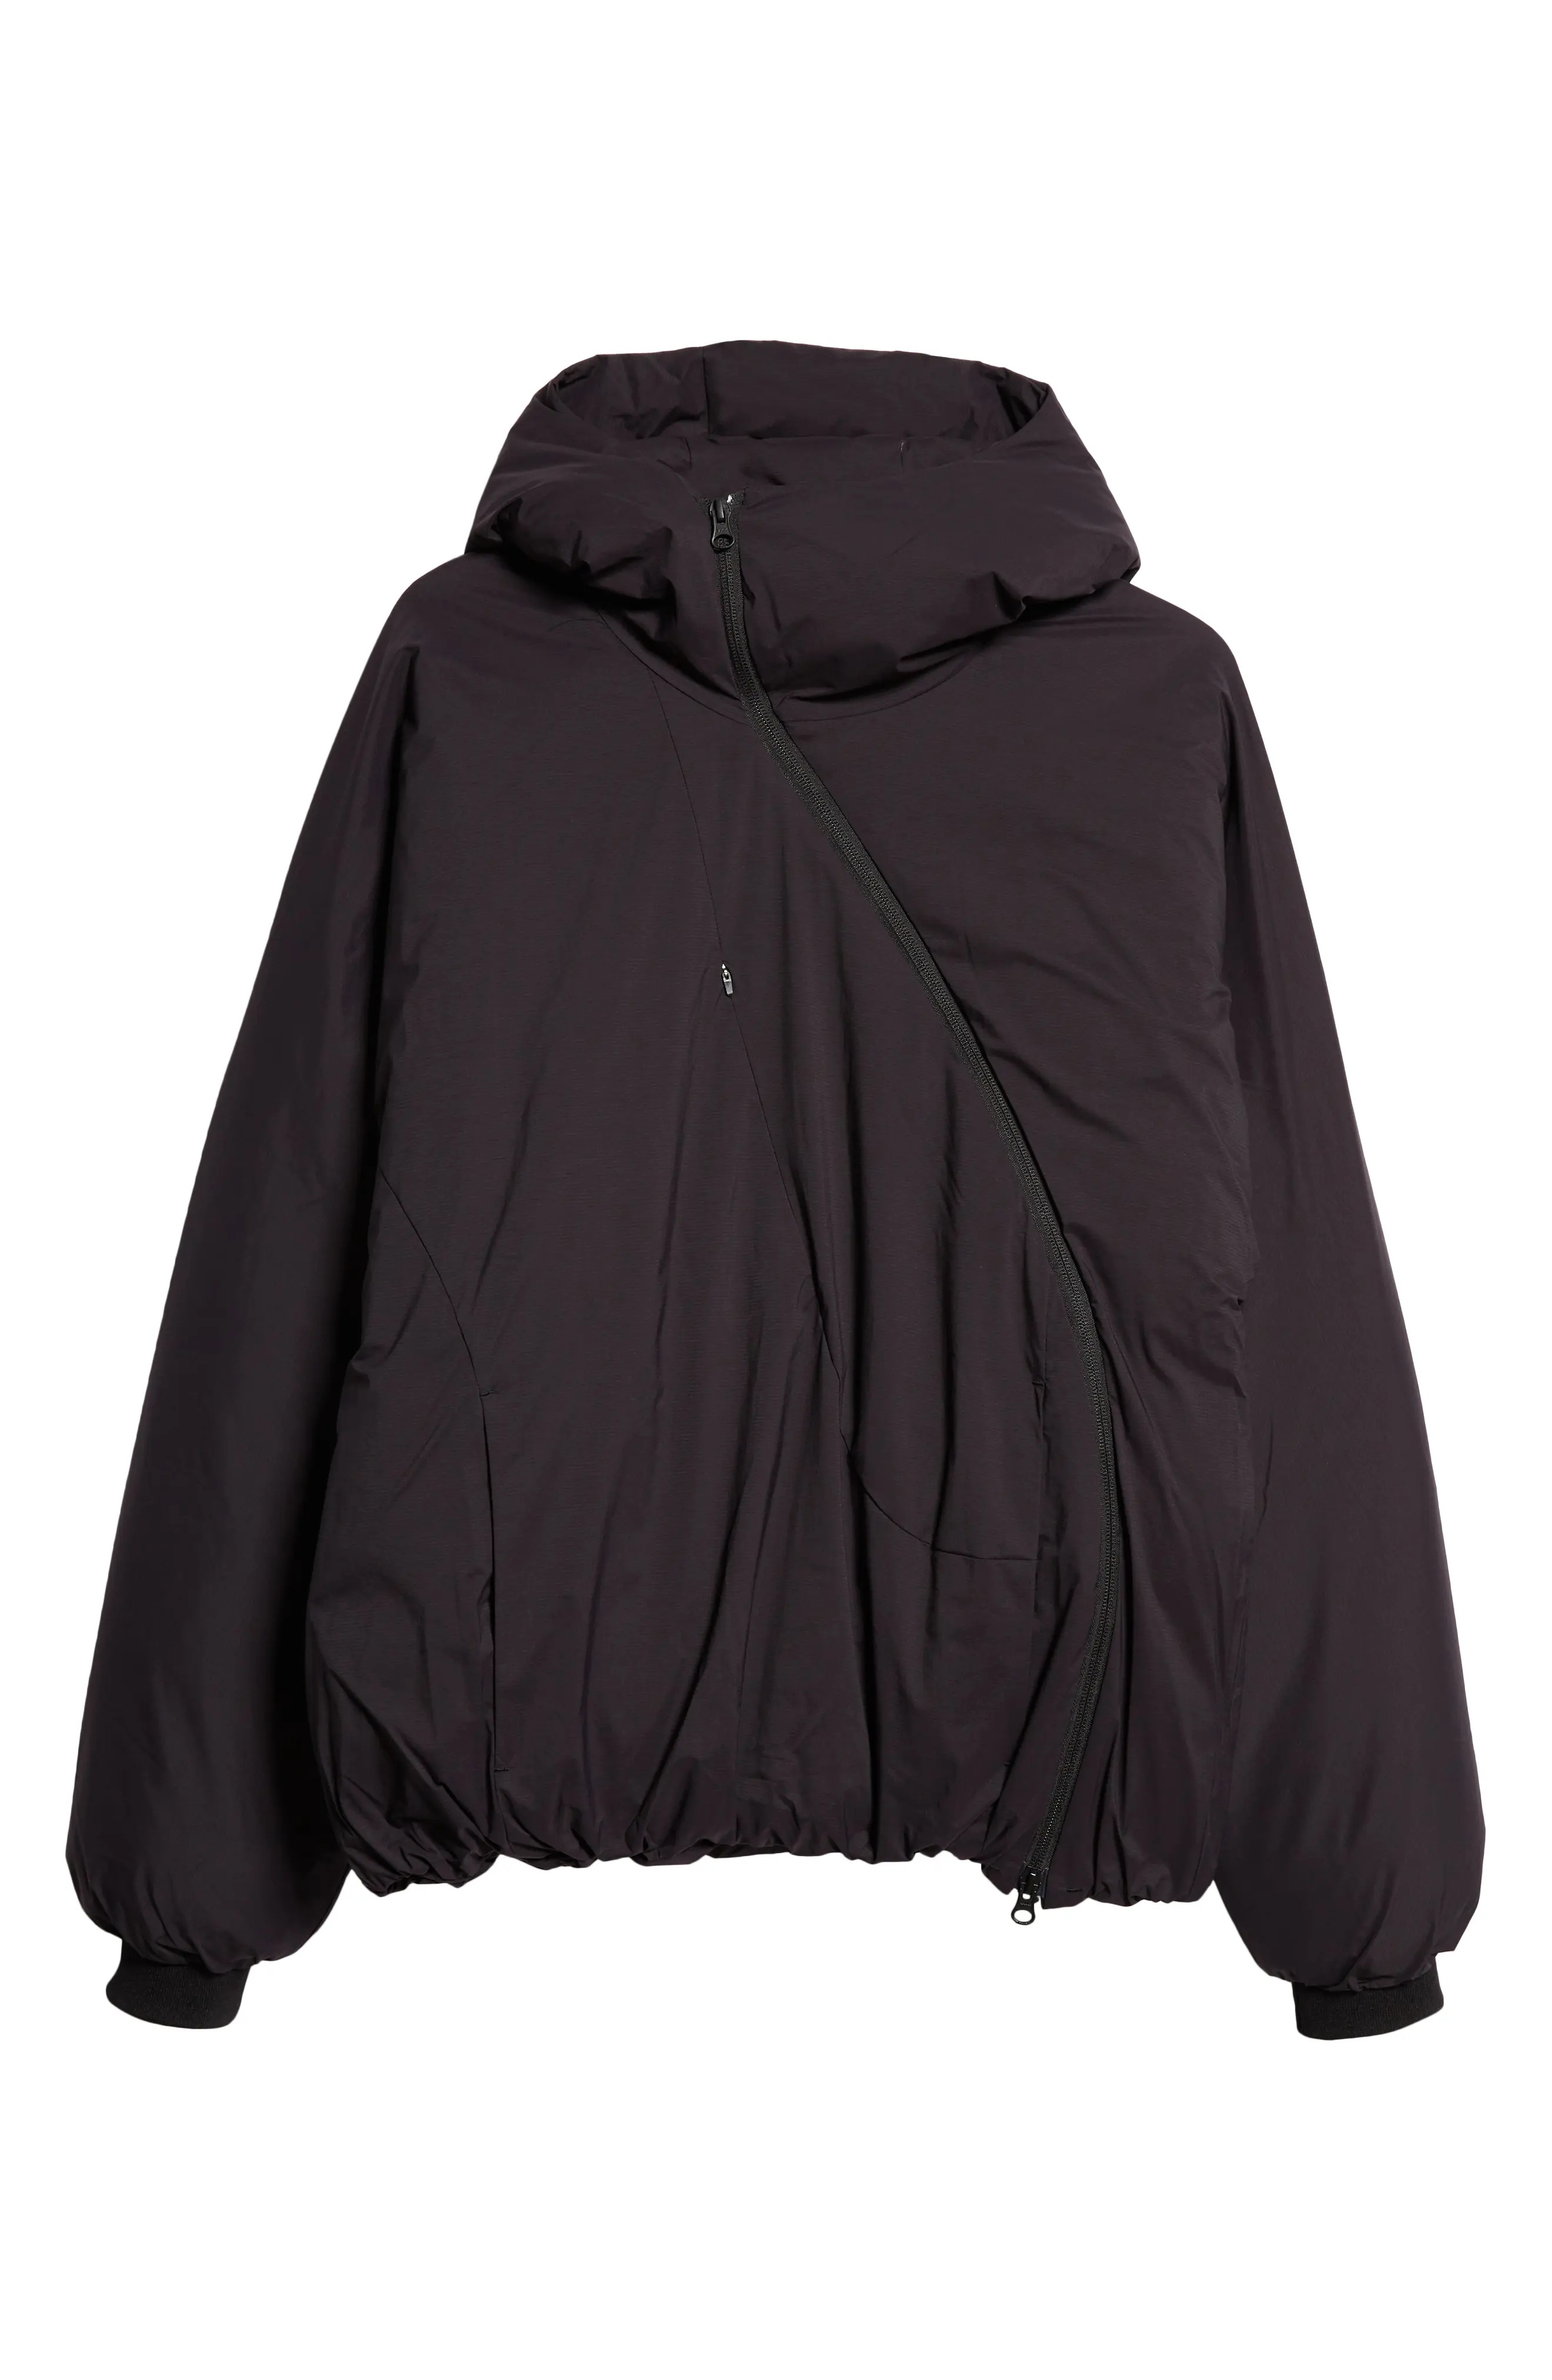 5.1 Water Resistant Down Center Jacket - 6